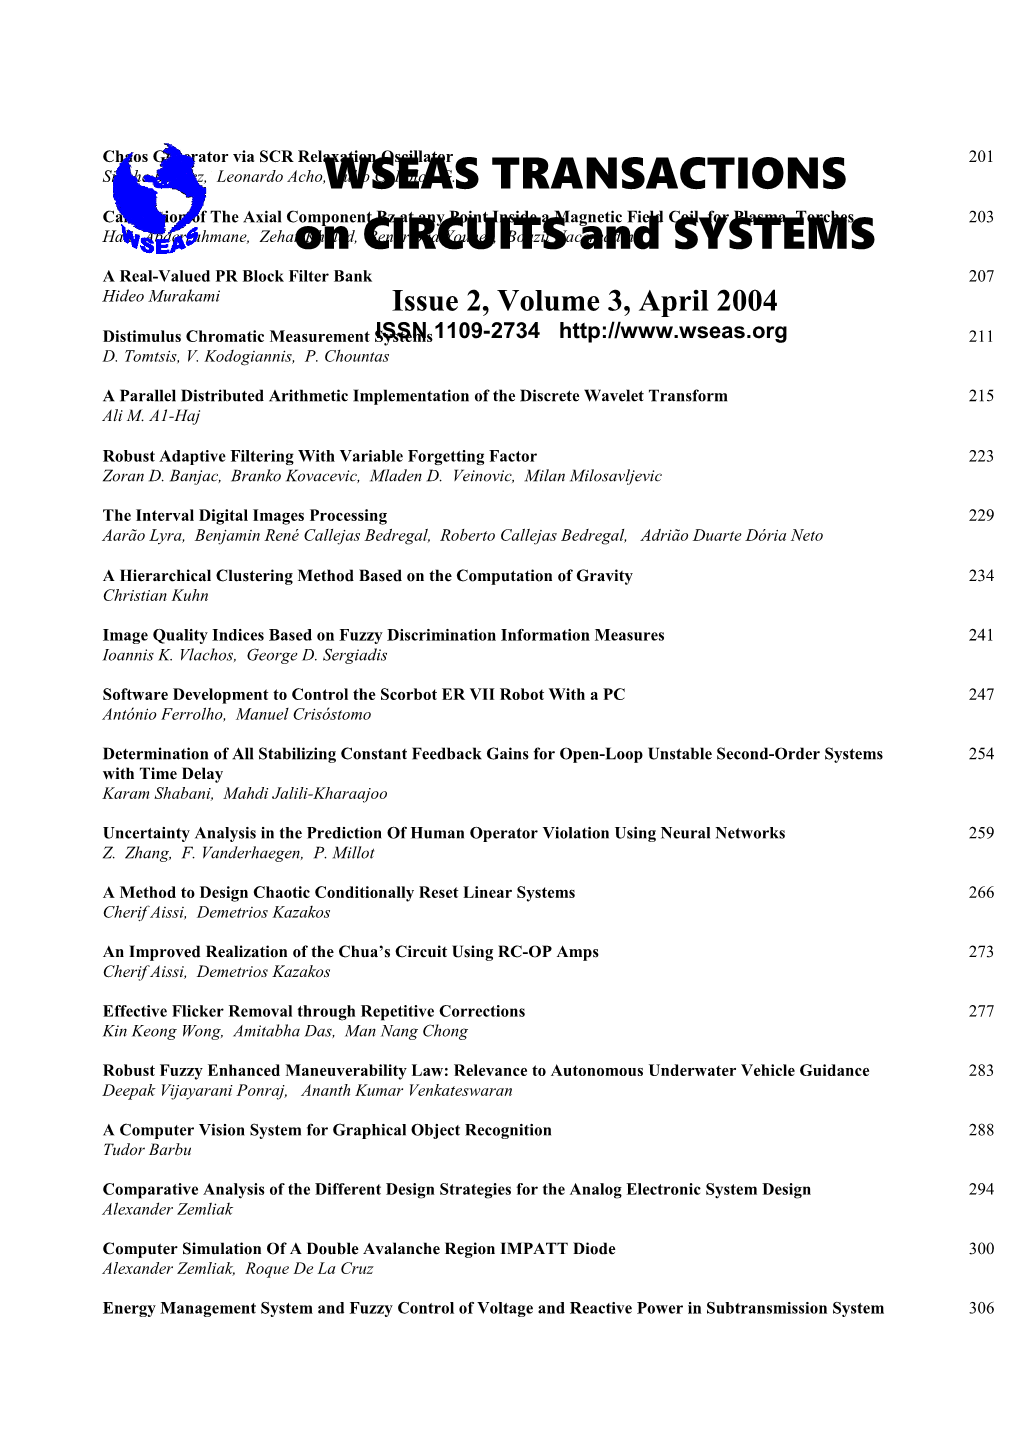 WSEAS Trans. on CIRCUITS and SYSTEMS, April 2004